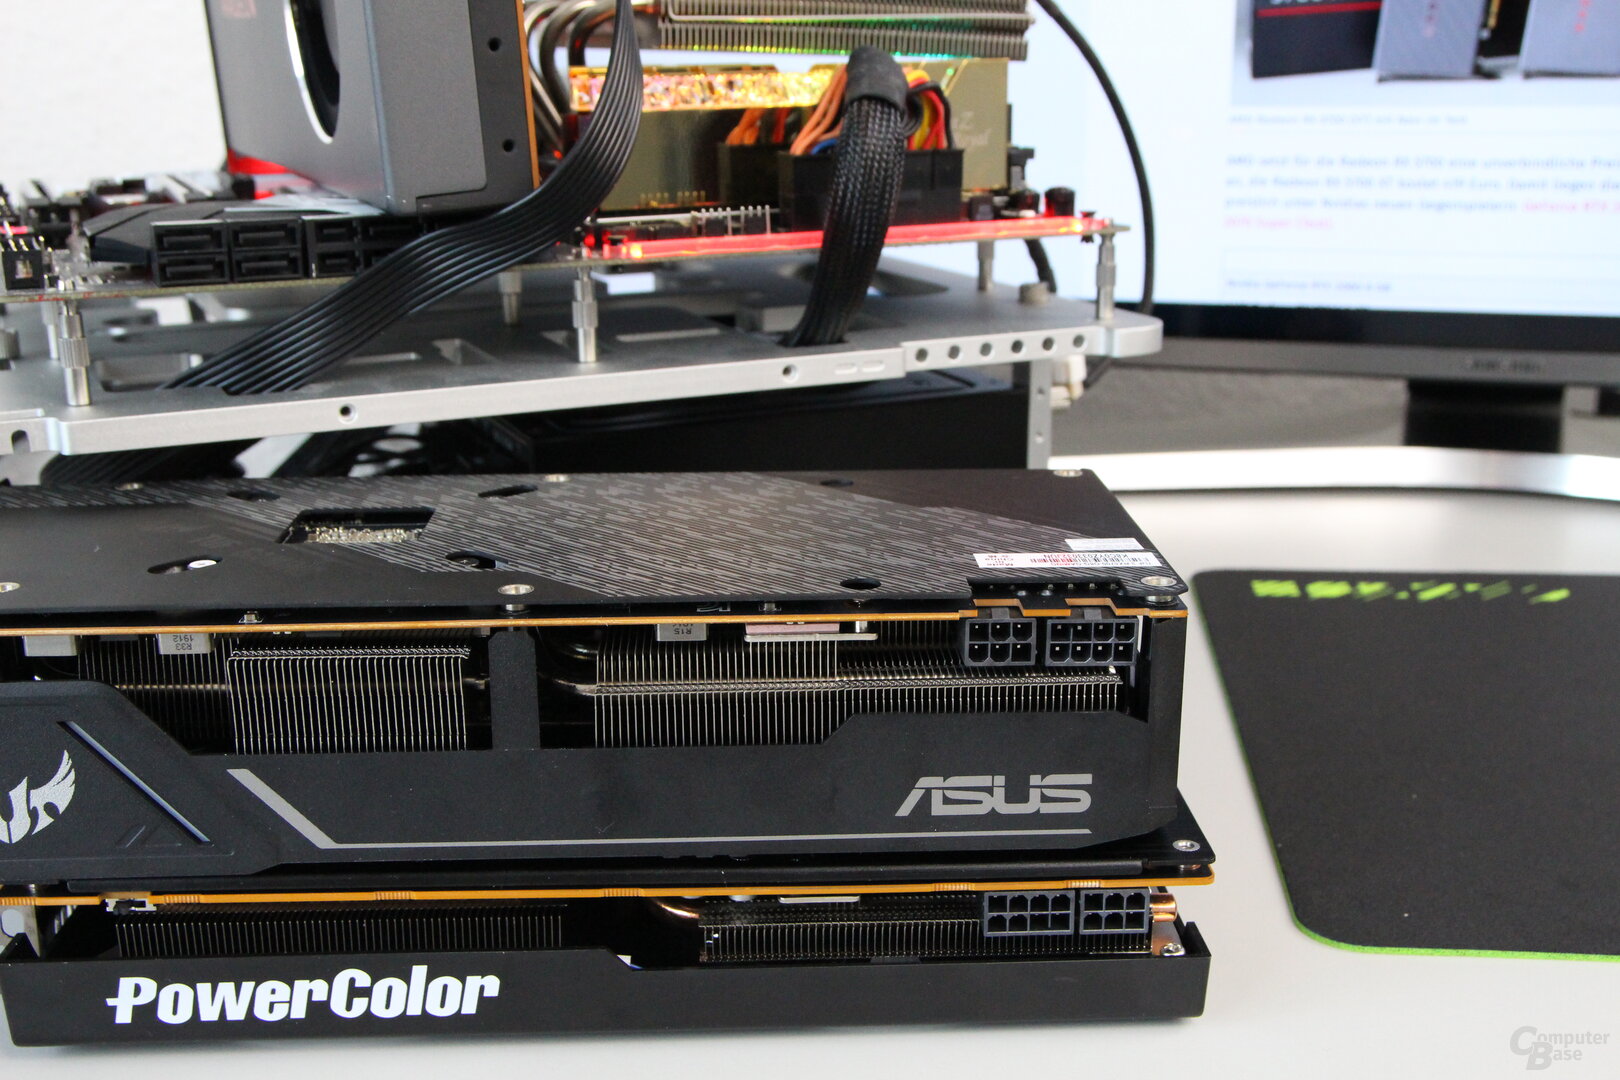 The Asus Radeon RX 5700 TUF and PowerColor Radeon RX 5700 Red Dragon in the test